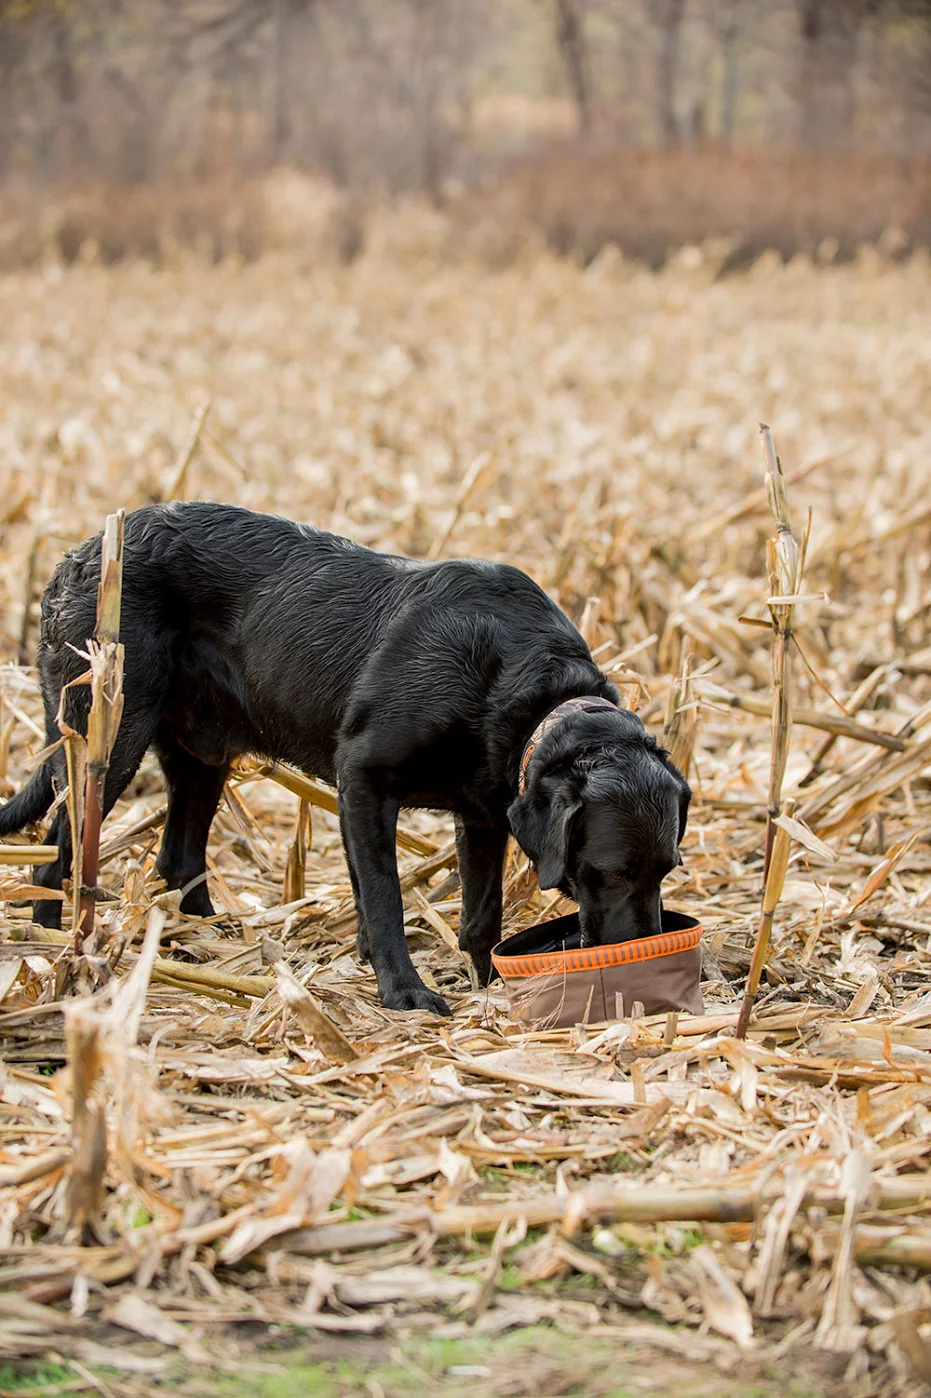 When you’re running a bird dog, hydration and food are keys for the animal.